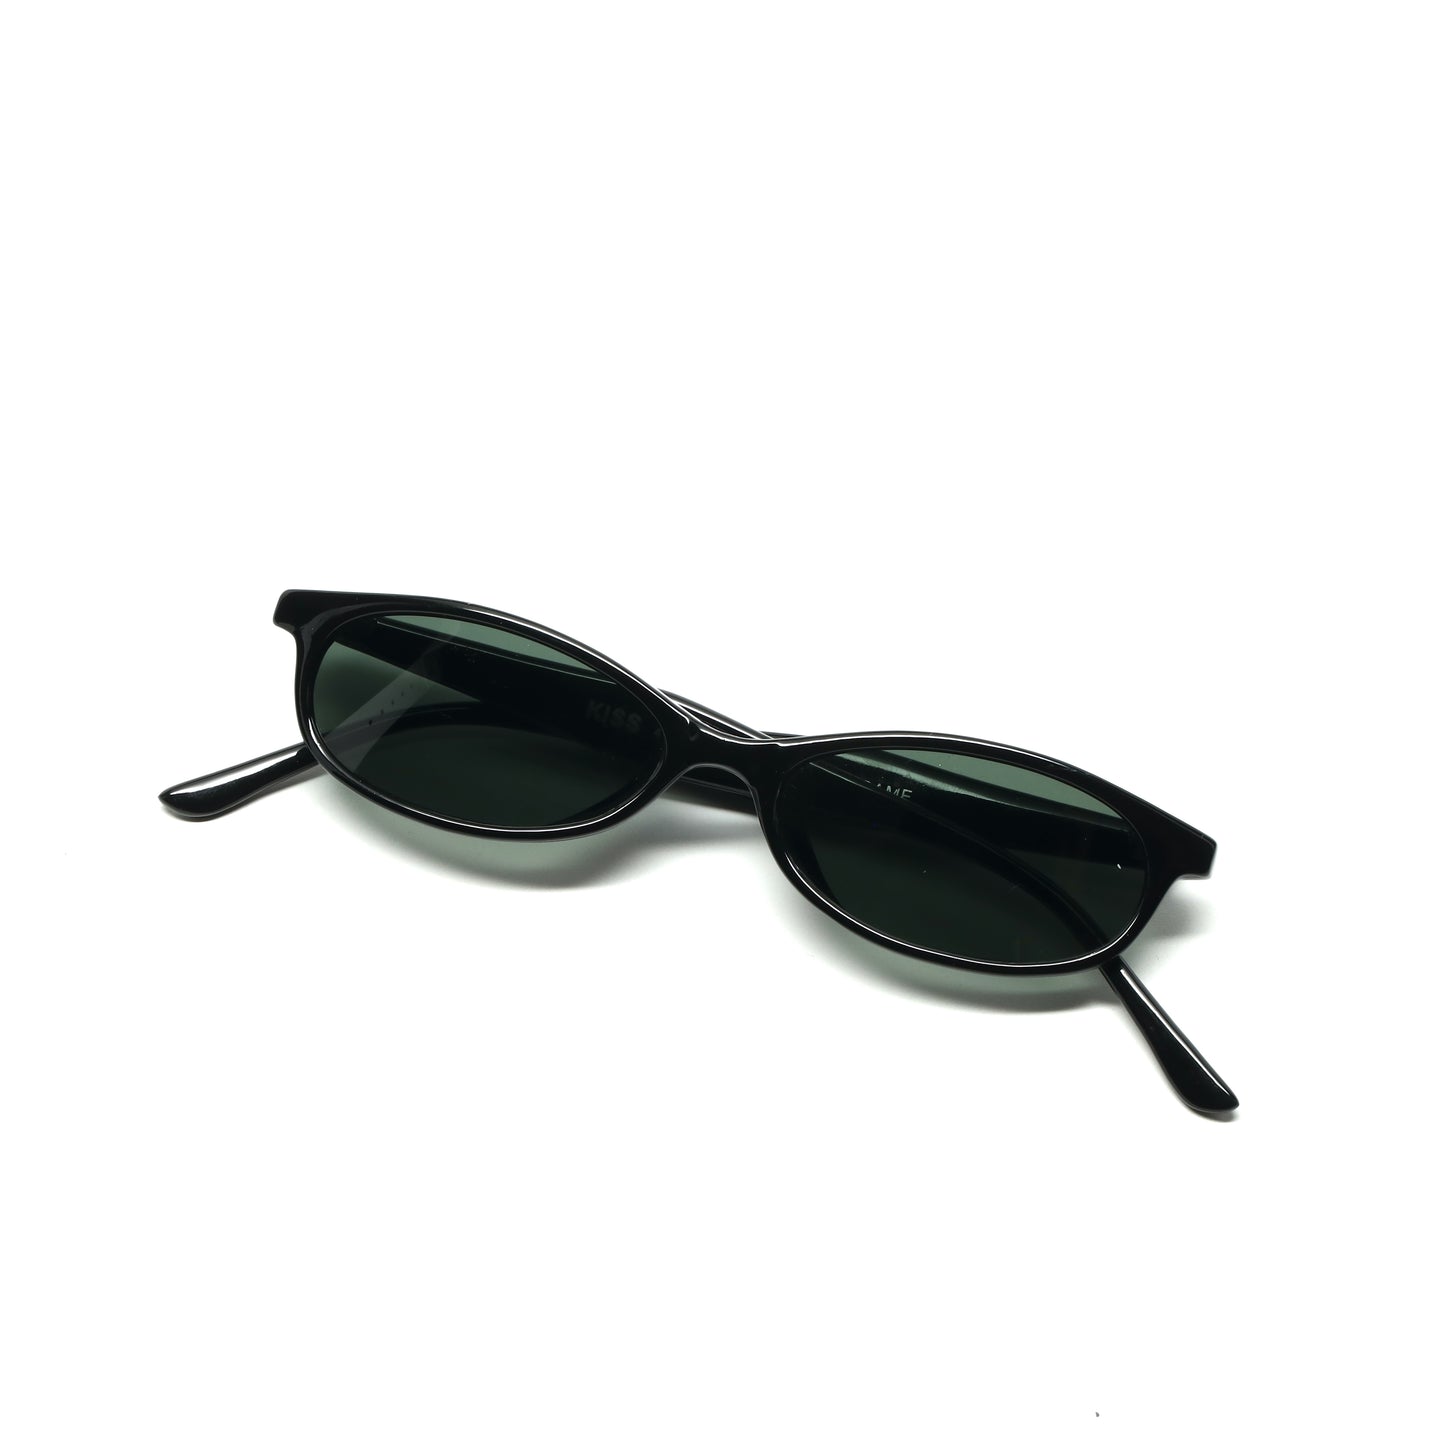 //Style 75// Deluxe Vintage 90s Small Chic Sunglasses - Black